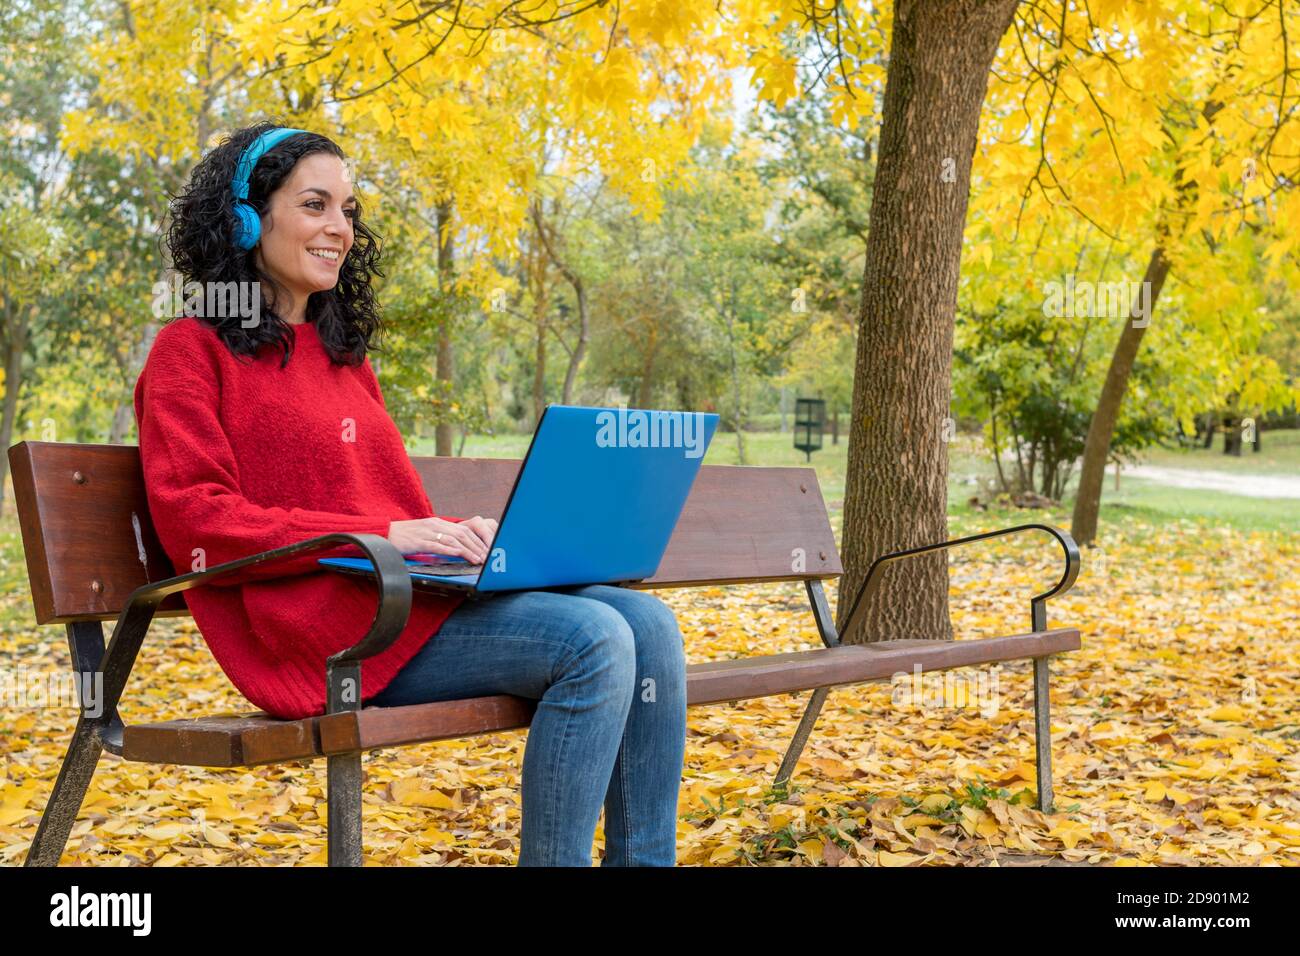 young woman with curly hair sitting on a bench working with laptop and blue wireless headphones while smiling in autumn with leaves falling from the t Stock Photo